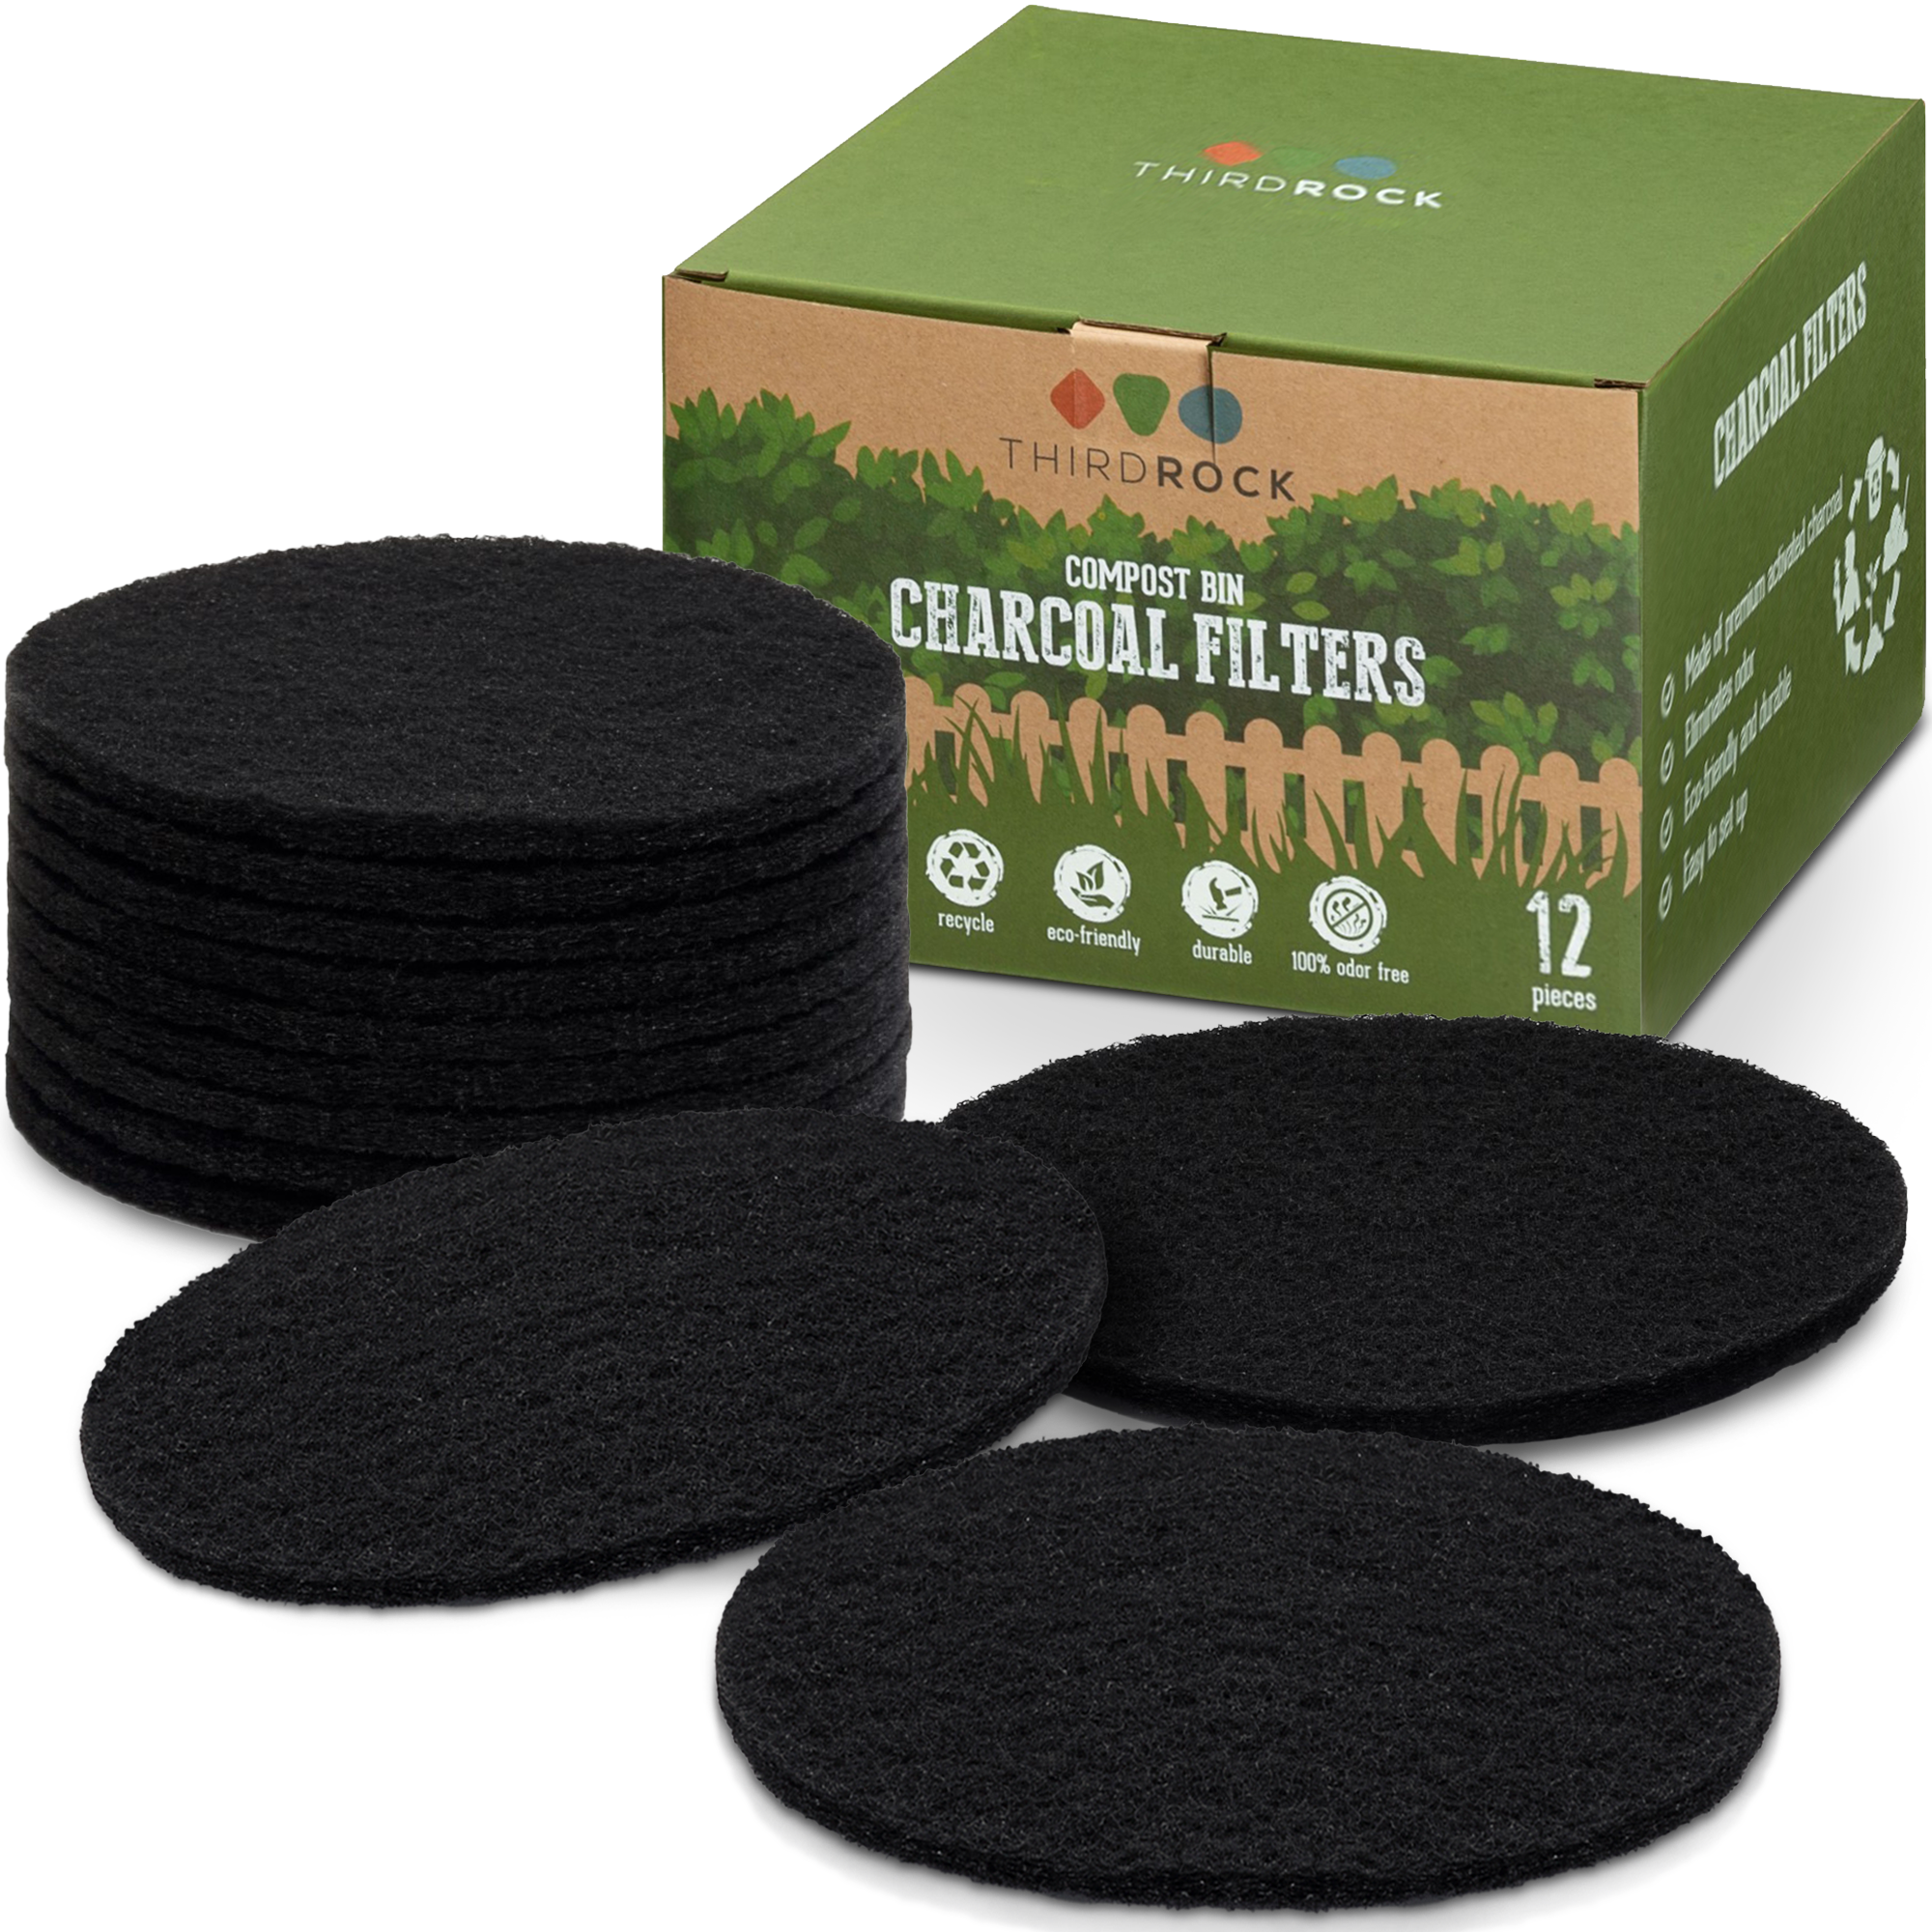 Charcoal Filter Replacements for Kitchen Compost Bin - 5.1/6.5 inches